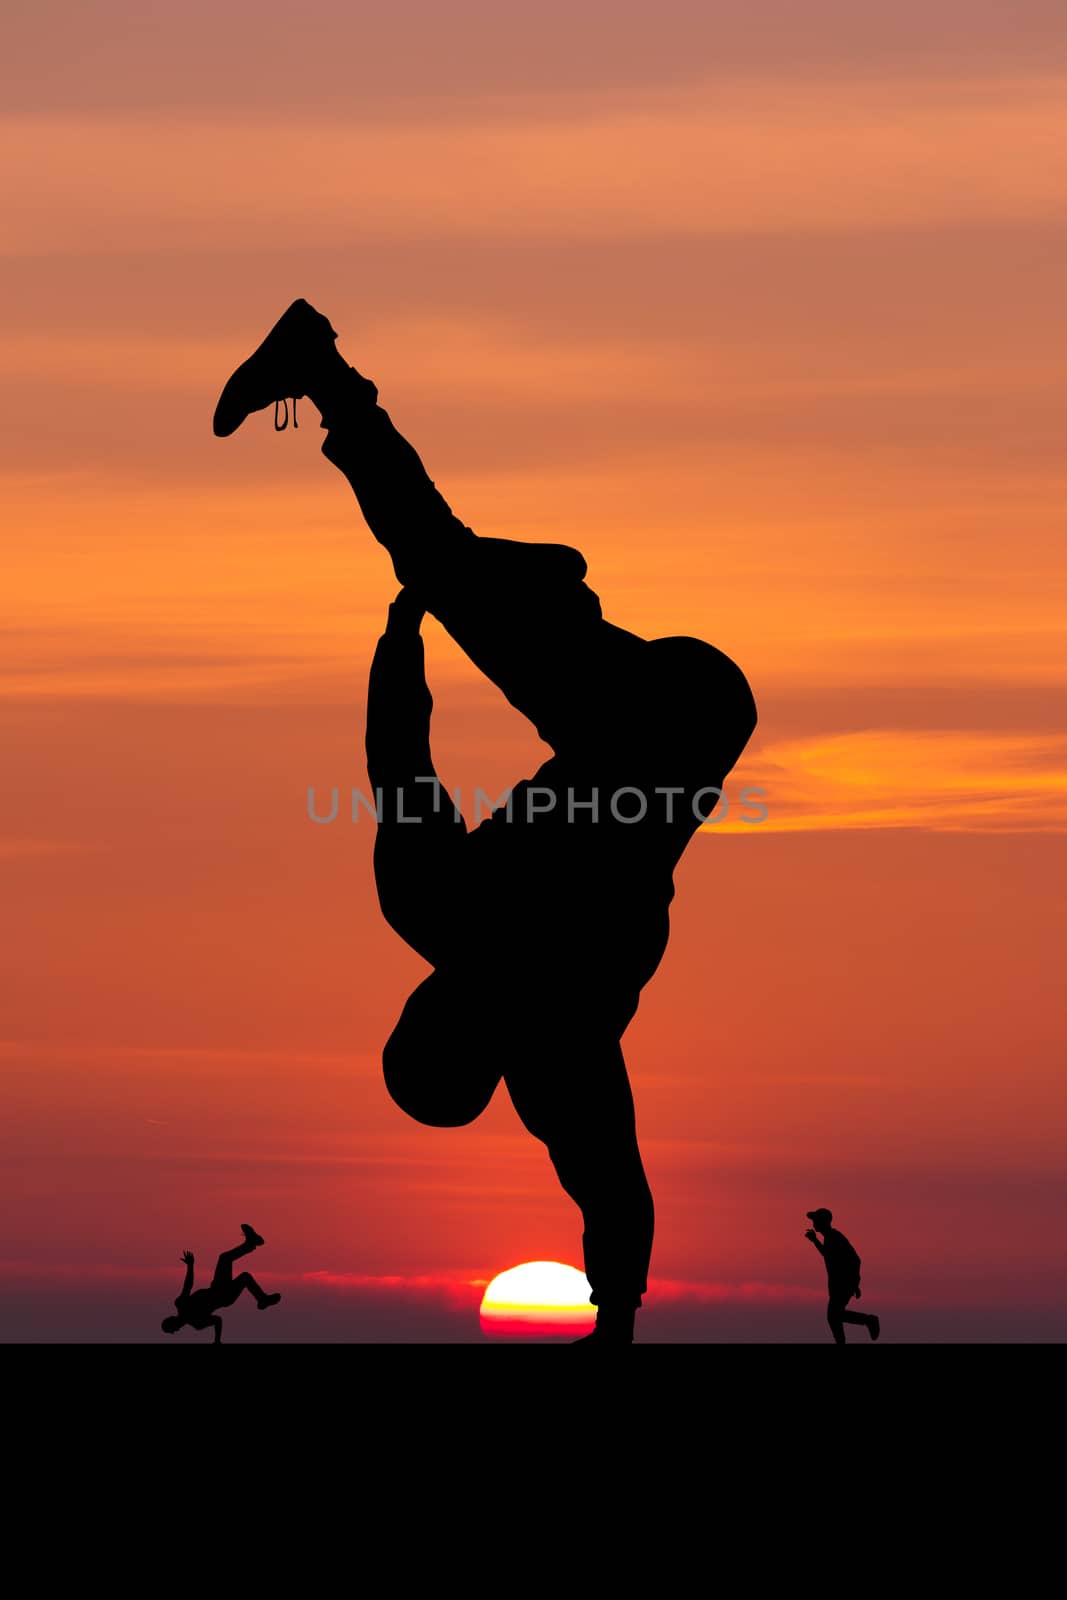 illustration of breakdance performer at sunset by adrenalina